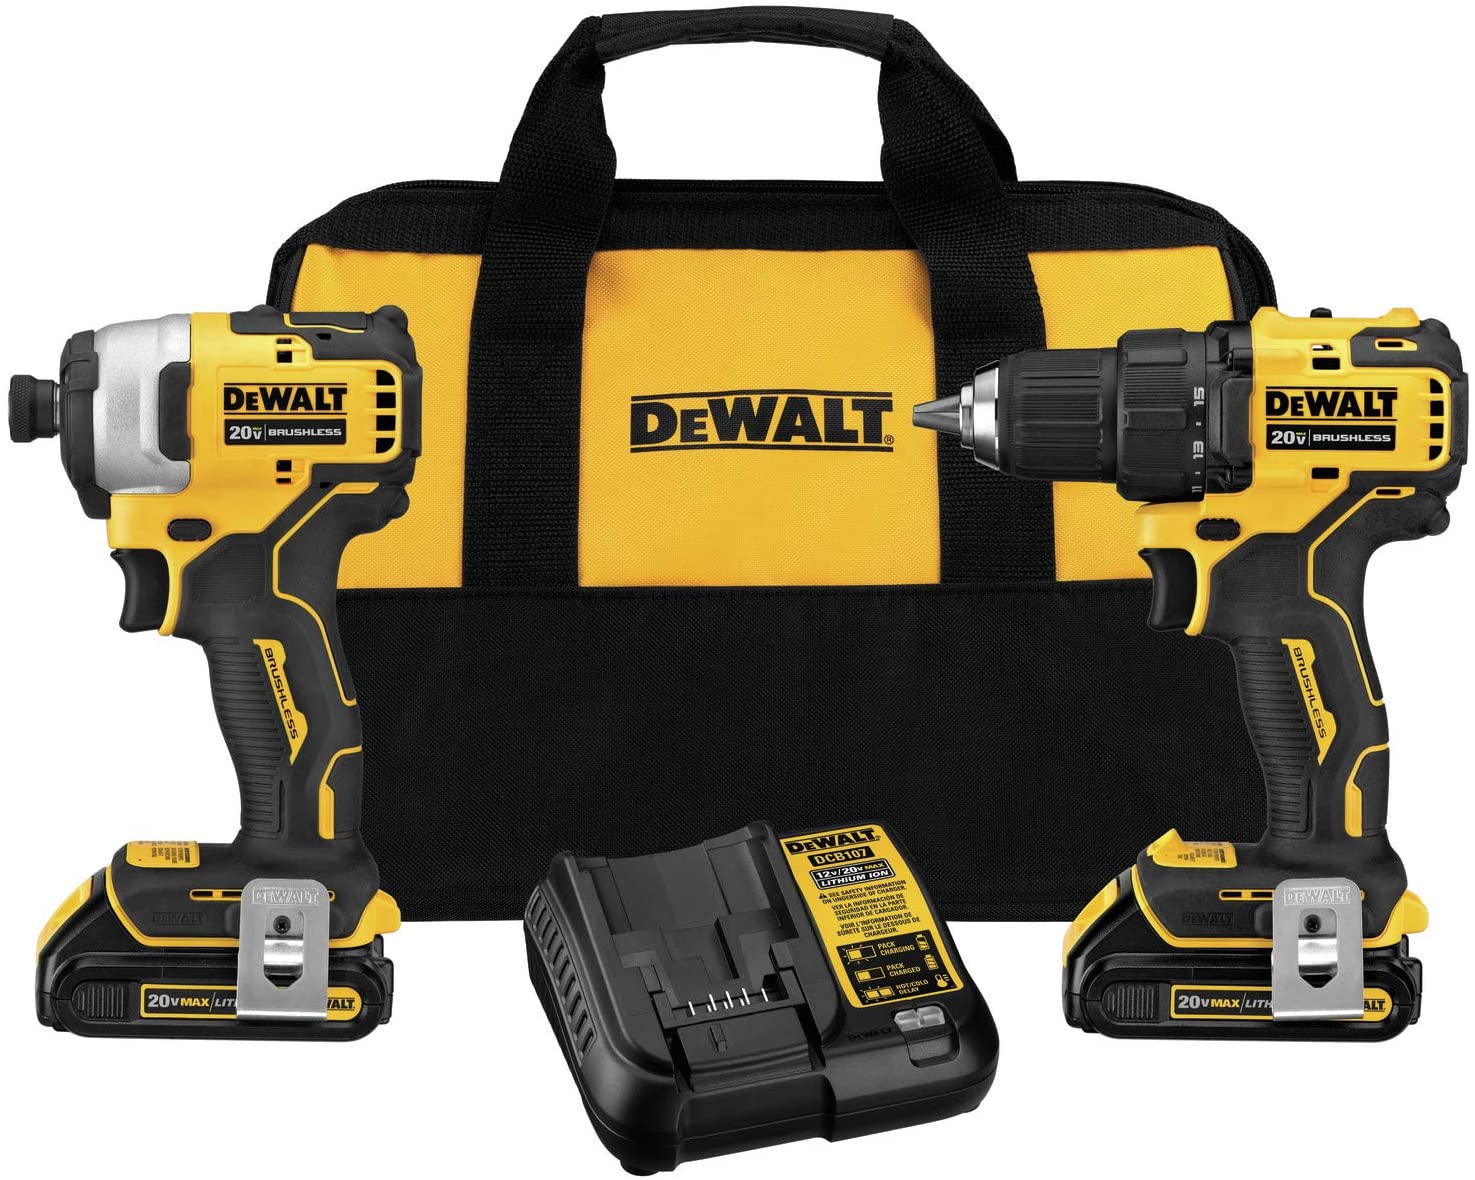 Dewalt 20V MAX XR Cordless Lithium-Ion 1/2 in. Brushless Drill Driver and Impact Driver Combo Kit